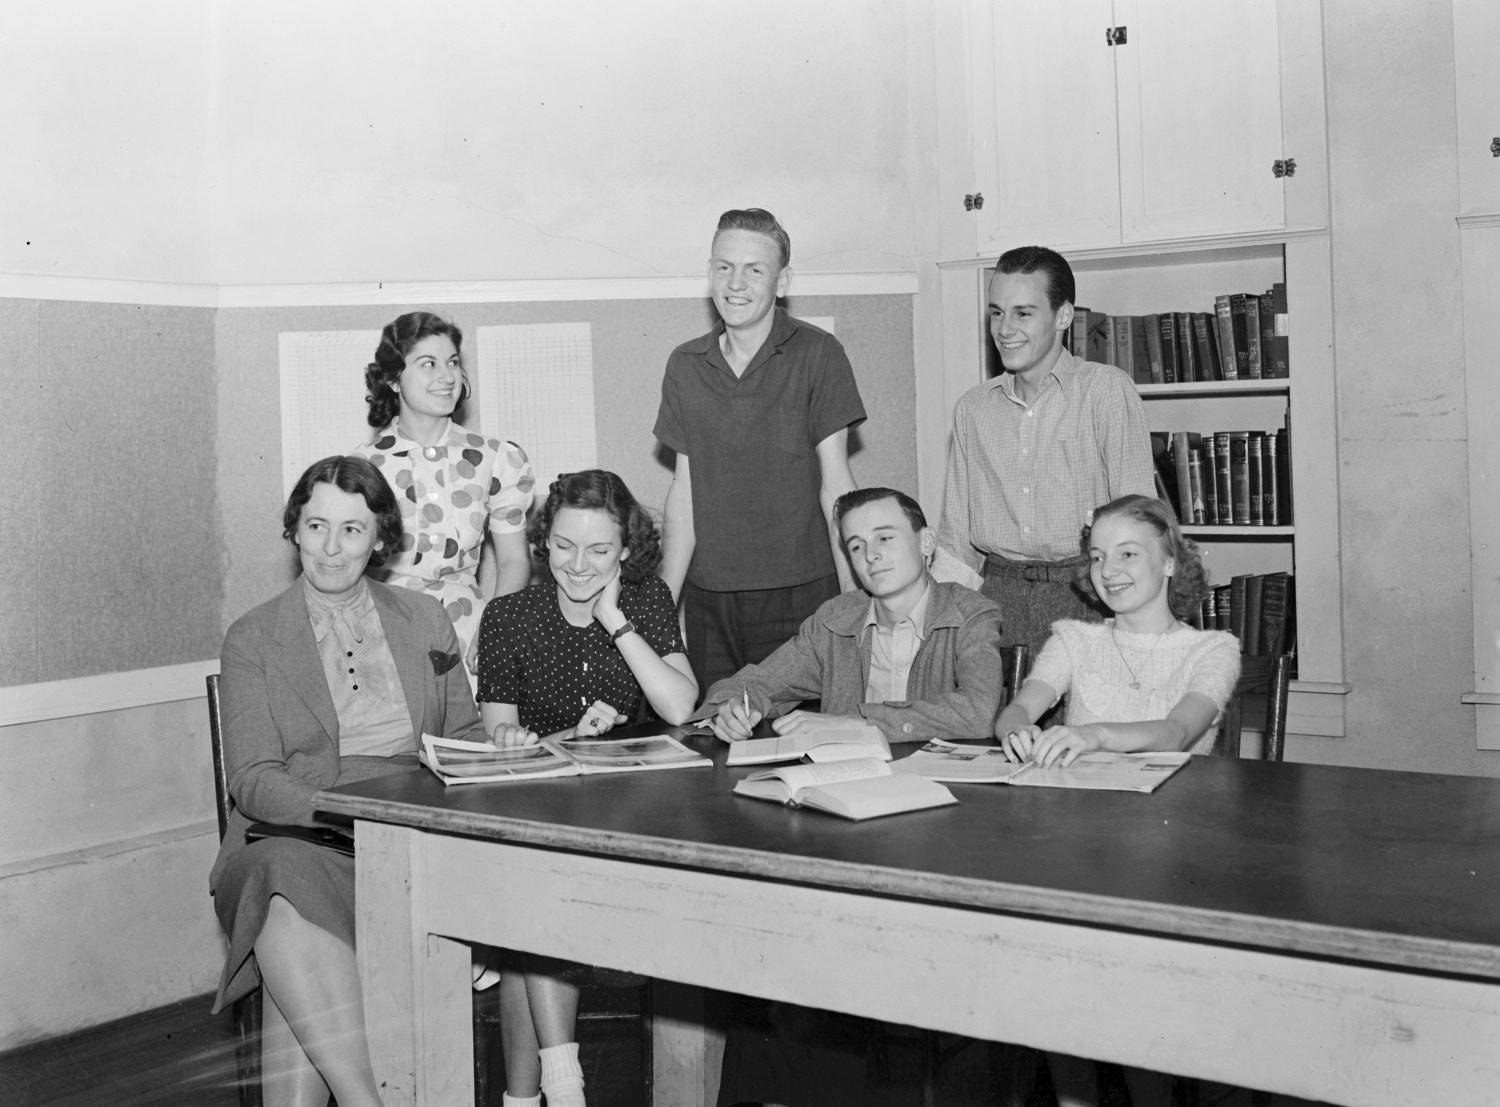 Photograph of seven people at a table